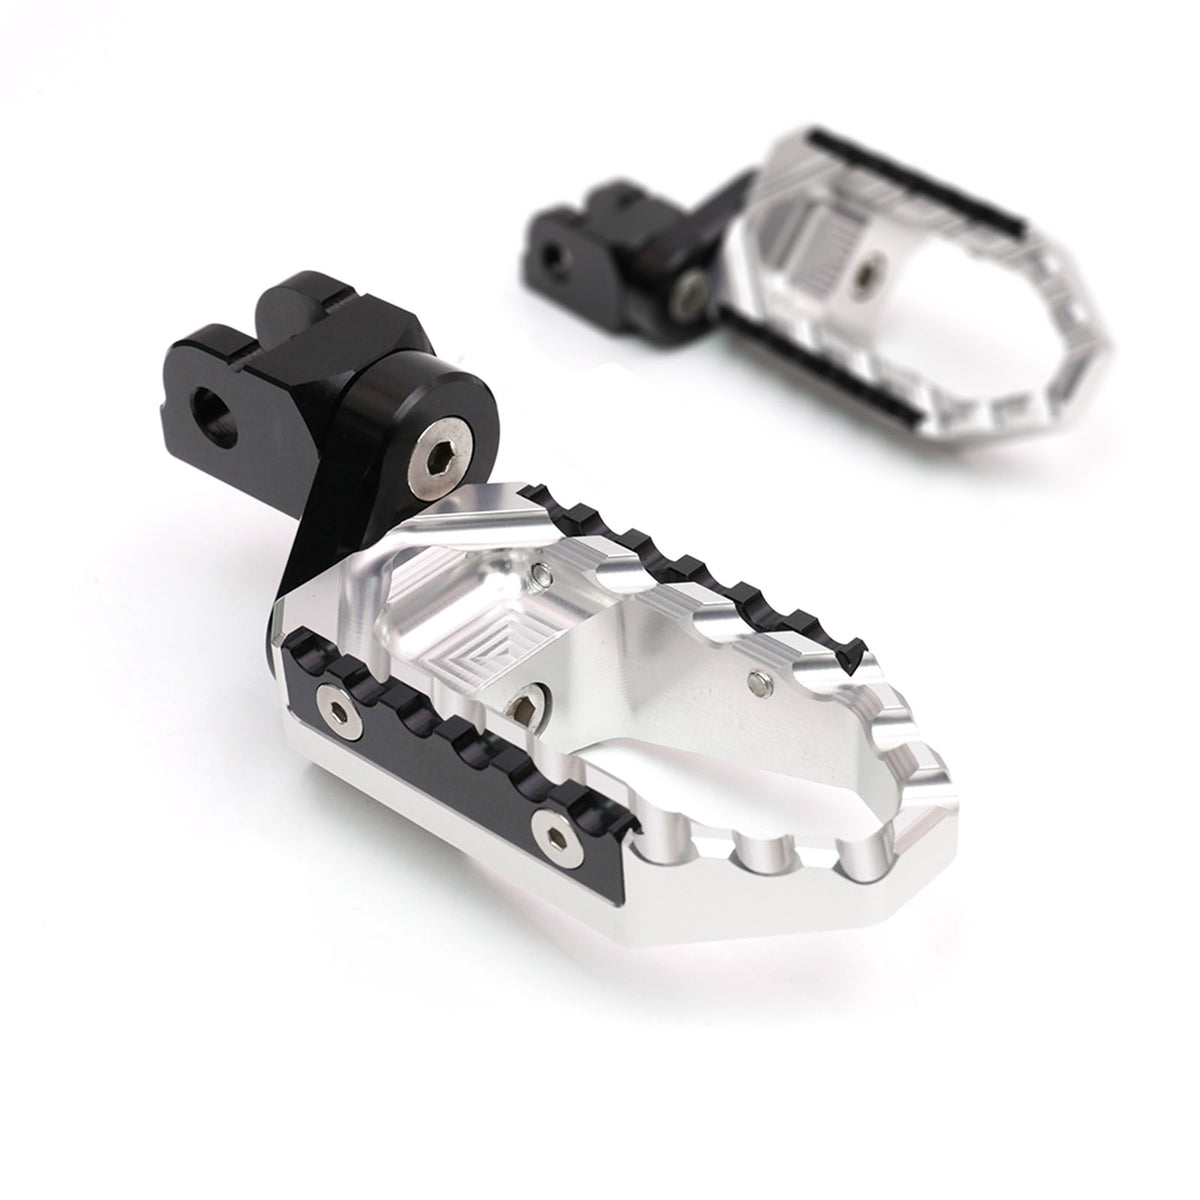 Fits Triumph America Daytona 675 25mm extension Rear TRC Touring Wide Foot Pegs